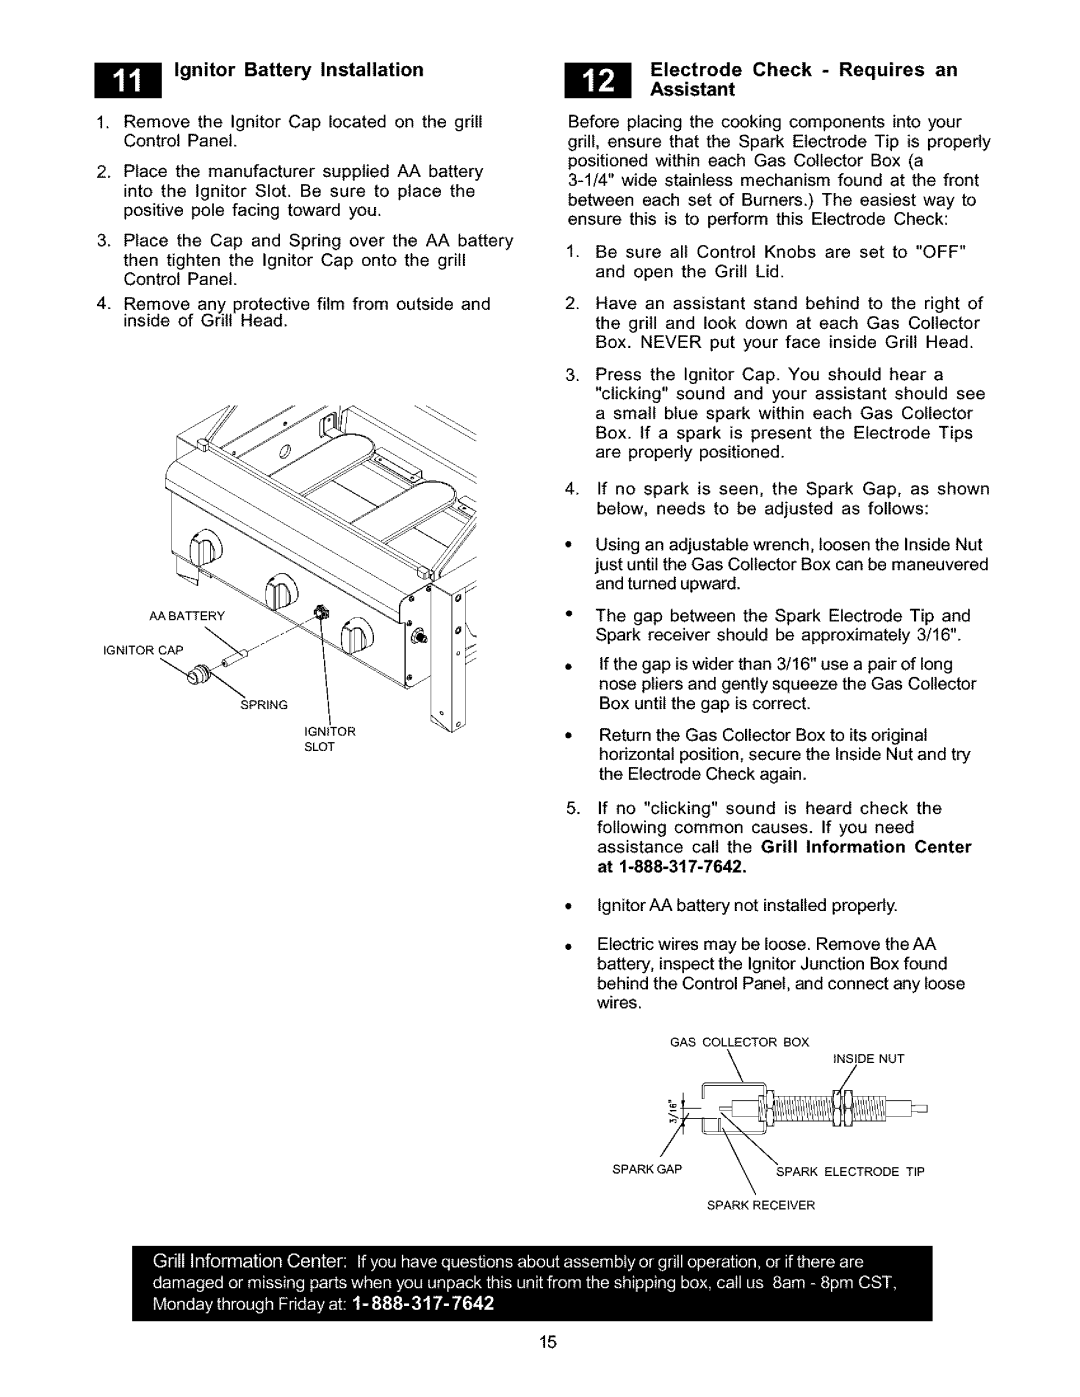 Kenmore 141.16223 owner manual Ignitor Battery Installation, Electrode Check Requires an Assistant 